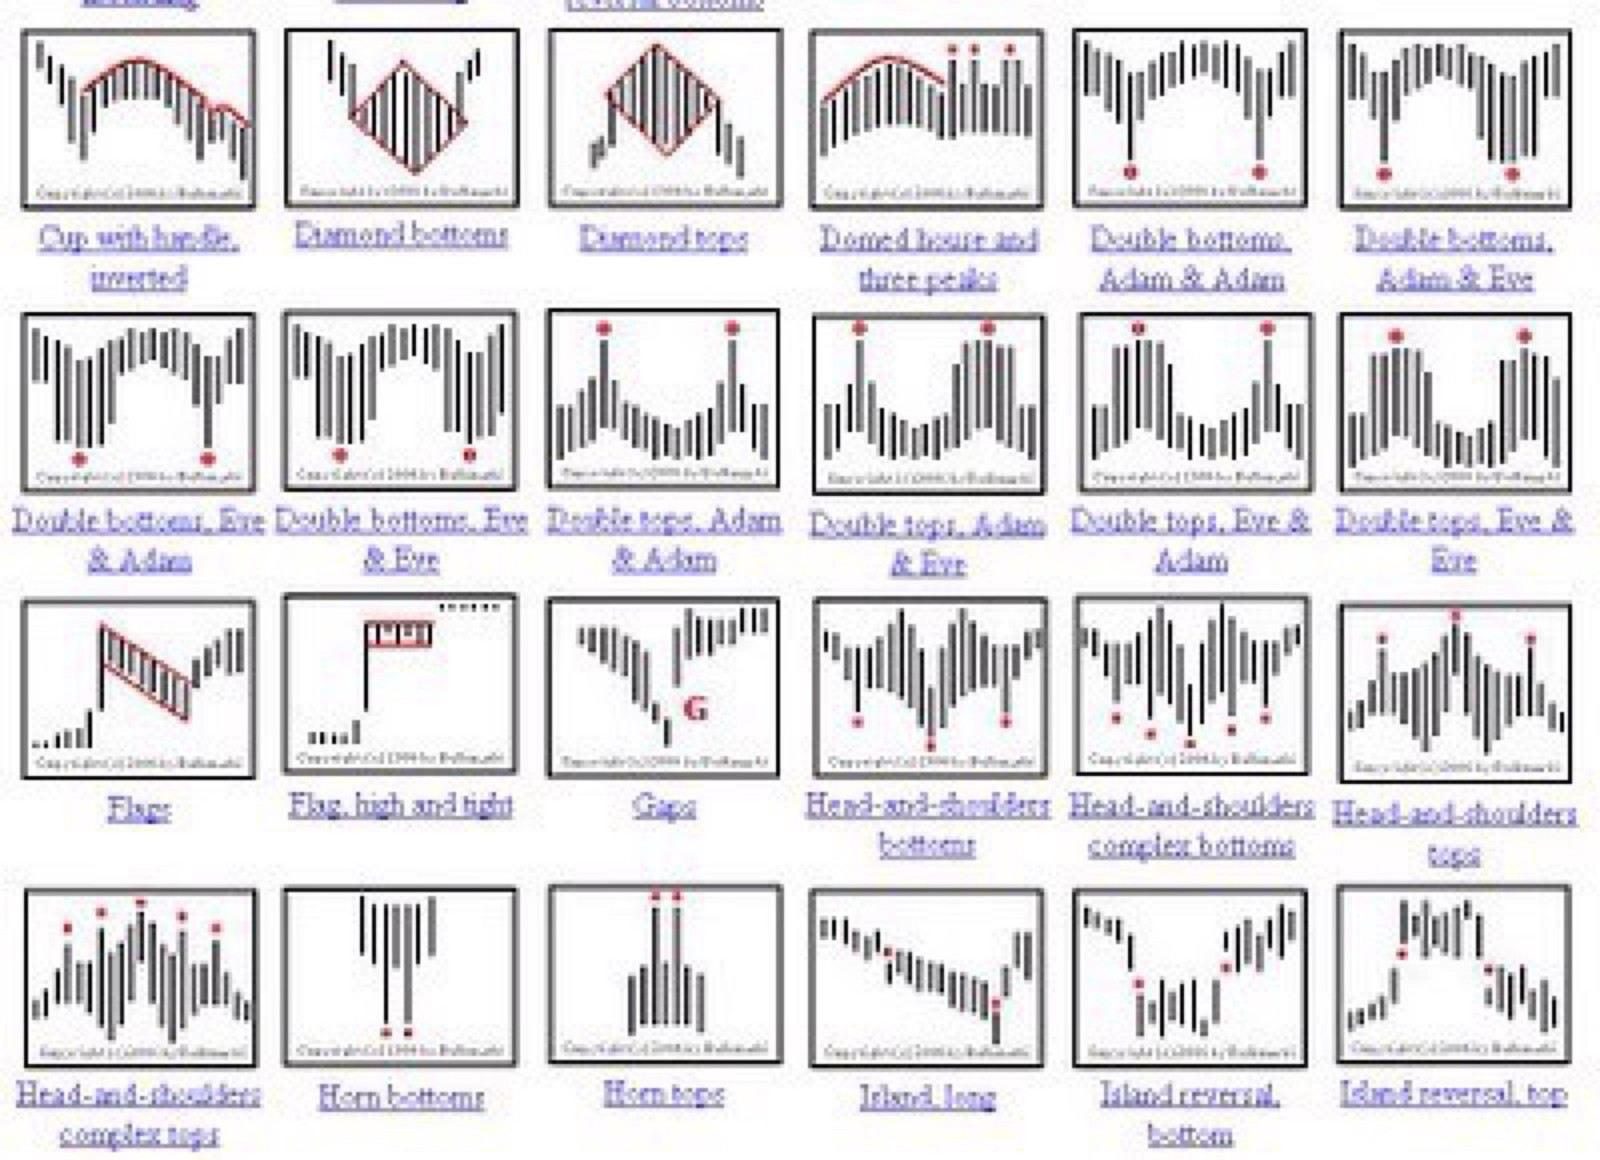 Trading with candlesticks pdf free